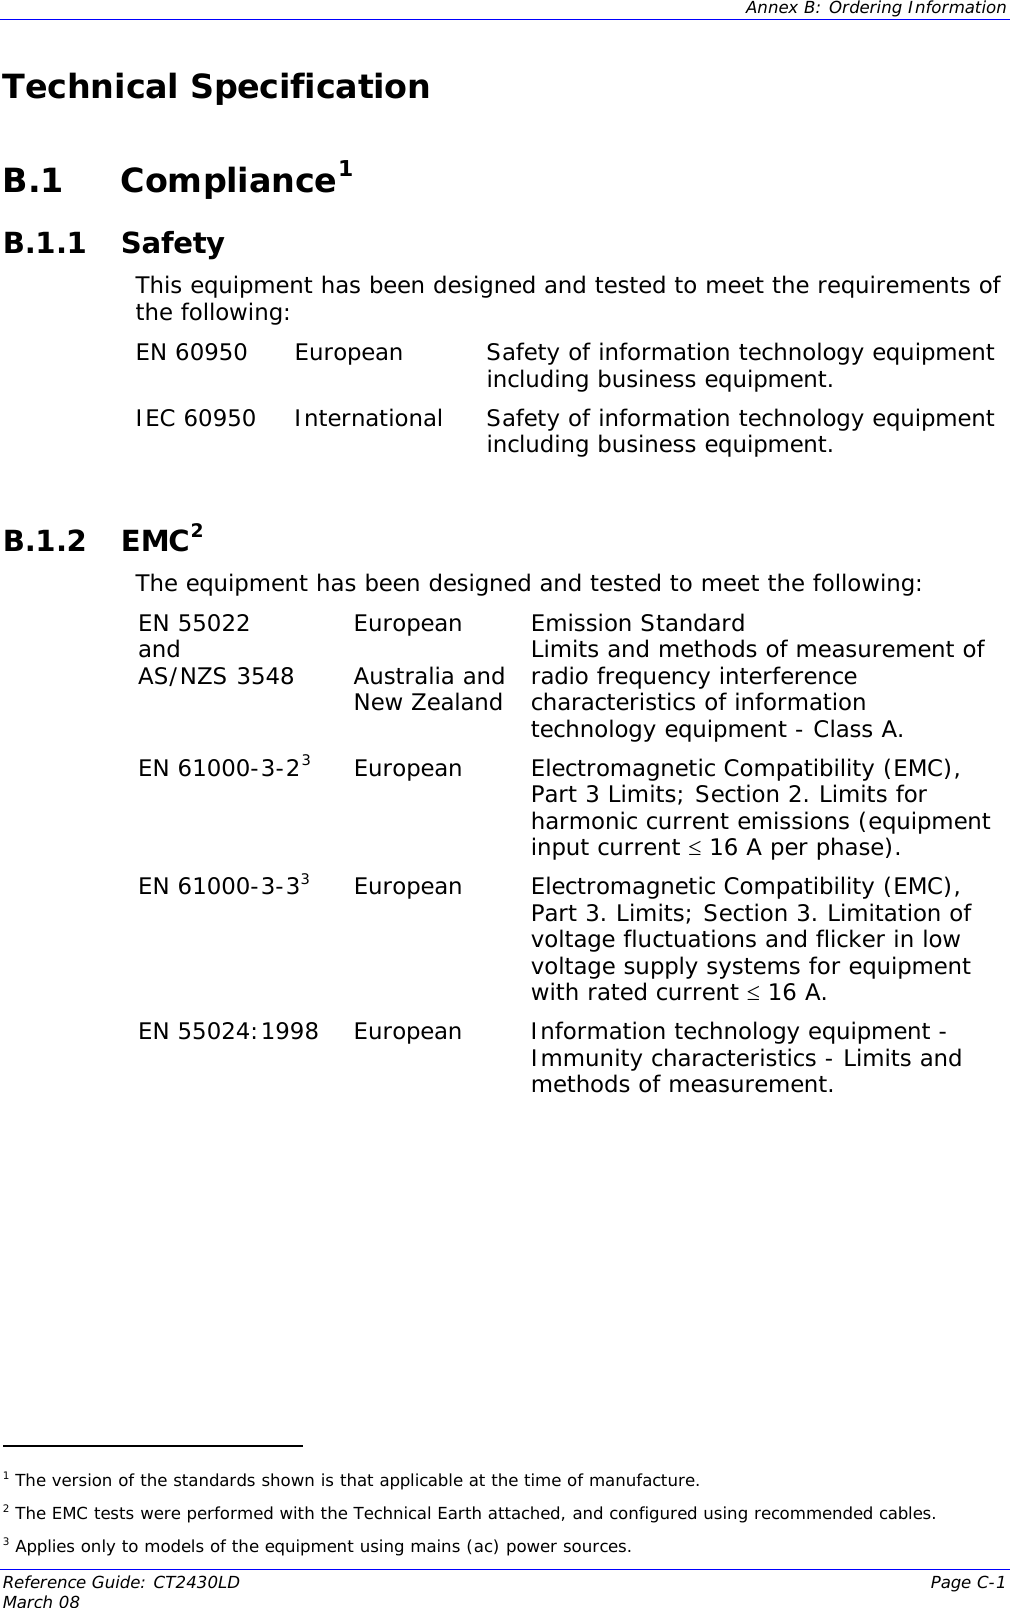  Annex B: Ordering Information  Reference Guide: CT2430LD  Page C-1 March 08                                           Technical Specification  B.1 Compliance1  B.1.1 Safety This equipment has been designed and tested to meet the requirements of the following:  EN 60950  European  Safety of information technology equipment including business equipment. IEC 60950  International  Safety of information technology equipment including business equipment.  B.1.2 EMC2 The equipment has been designed and tested to meet the following:  EN 55022  and AS/NZS 3548   European  Australia and New Zealand Emission Standard Limits and methods of measurement of radio frequency interference characteristics of information technology equipment - Class A. EN 61000-3-23European  Electromagnetic Compatibility (EMC), Part 3 Limits; Section 2. Limits for harmonic current emissions (equipment input current ≤ 16 A per phase). EN 61000-3-33European  Electromagnetic Compatibility (EMC), Part 3. Limits; Section 3. Limitation of voltage fluctuations and flicker in low voltage supply systems for equipment with rated current ≤ 16 A. EN 55024:1998   European  Information technology equipment - Immunity characteristics - Limits and methods of measurement.     1 The version of the standards shown is that applicable at the time of manufacture. 2 The EMC tests were performed with the Technical Earth attached, and configured using recommended cables. 3 Applies only to models of the equipment using mains (ac) power sources. 